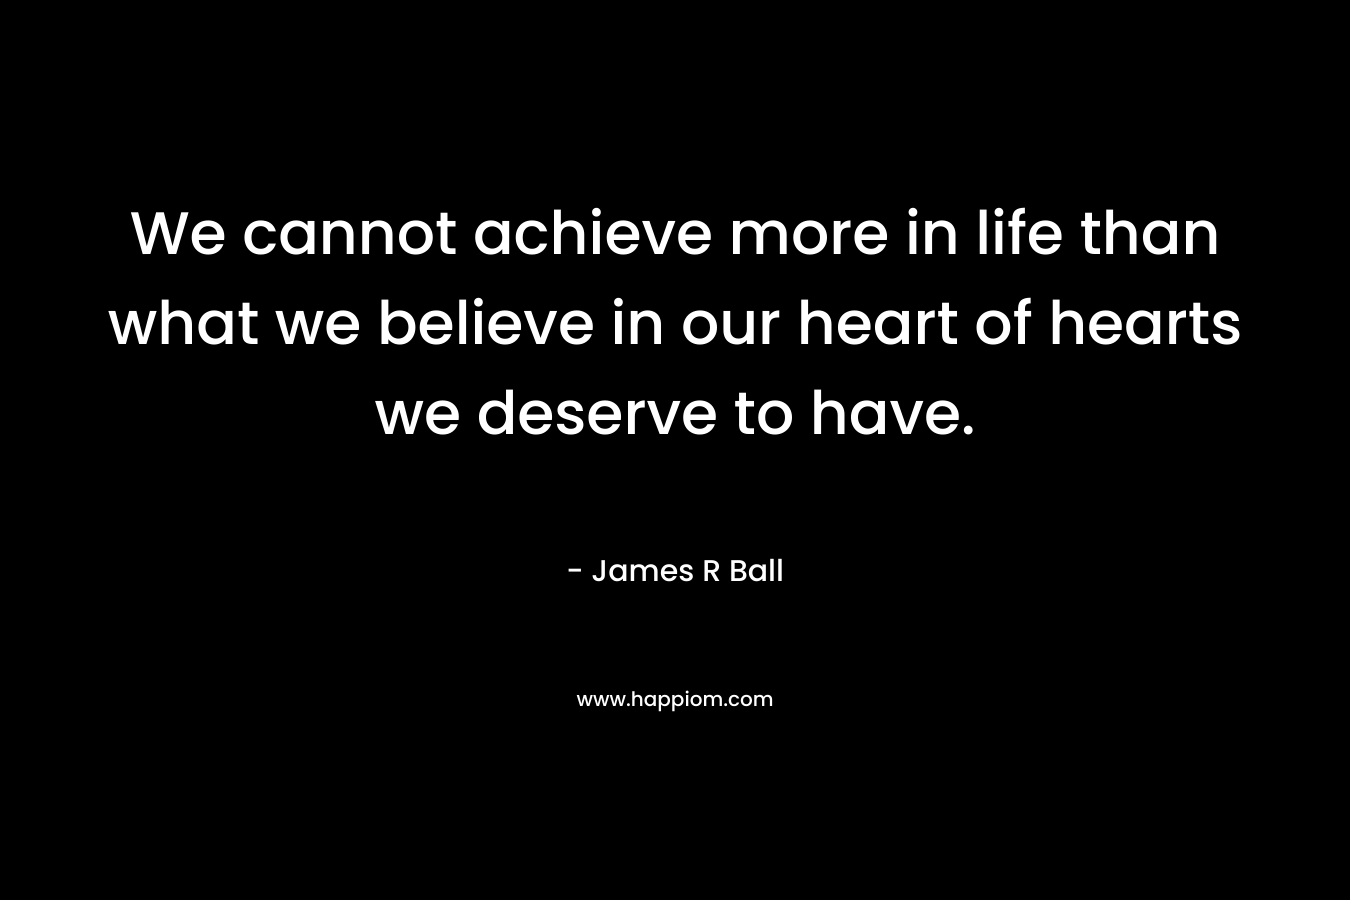 We cannot achieve more in life than what we believe in our heart of hearts we deserve to have.